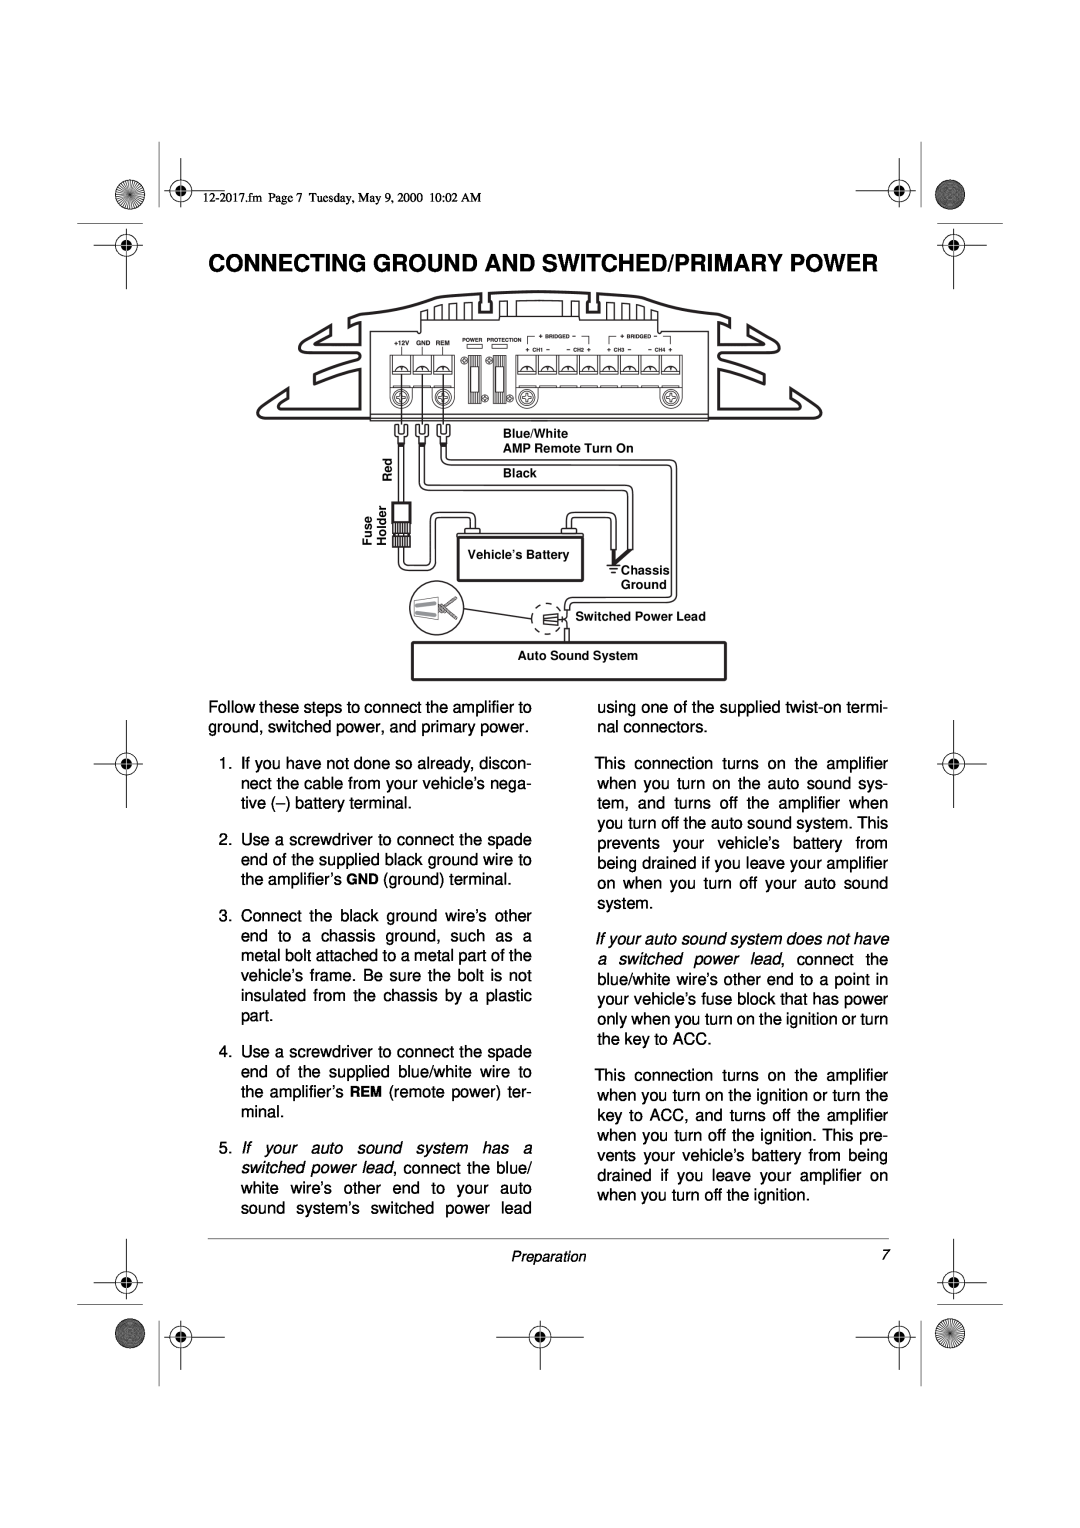 Radio Shack XL-260 owner manual Connecting Ground And Switched/Primary Power, Preparation 